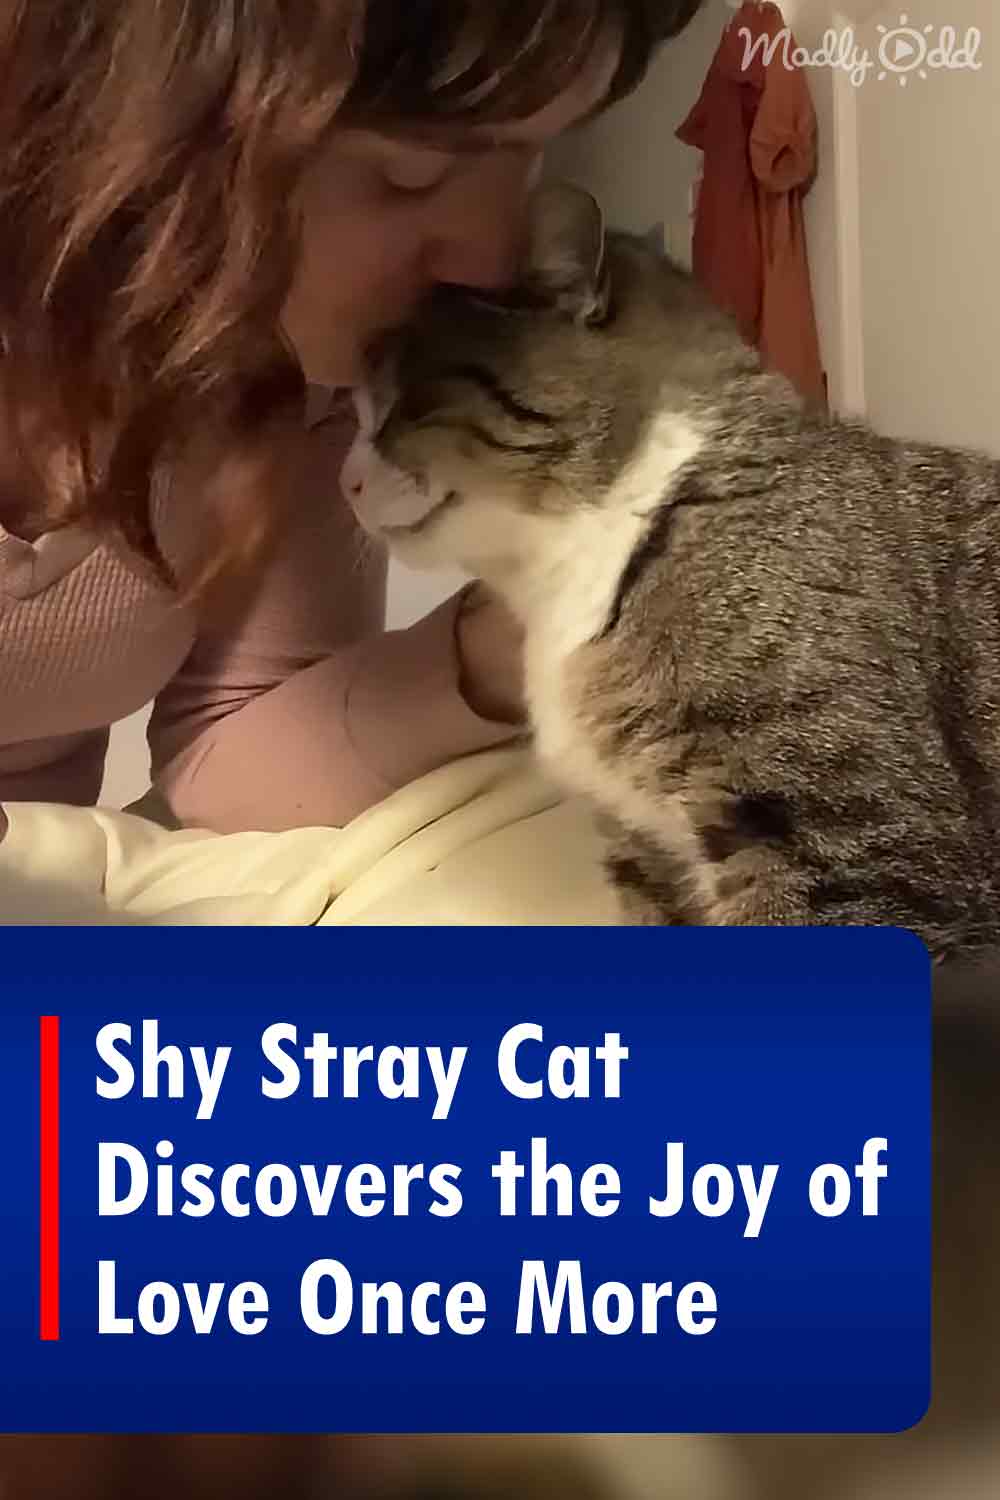 Shy Stray Cat Discovers the Joy of Love Once More